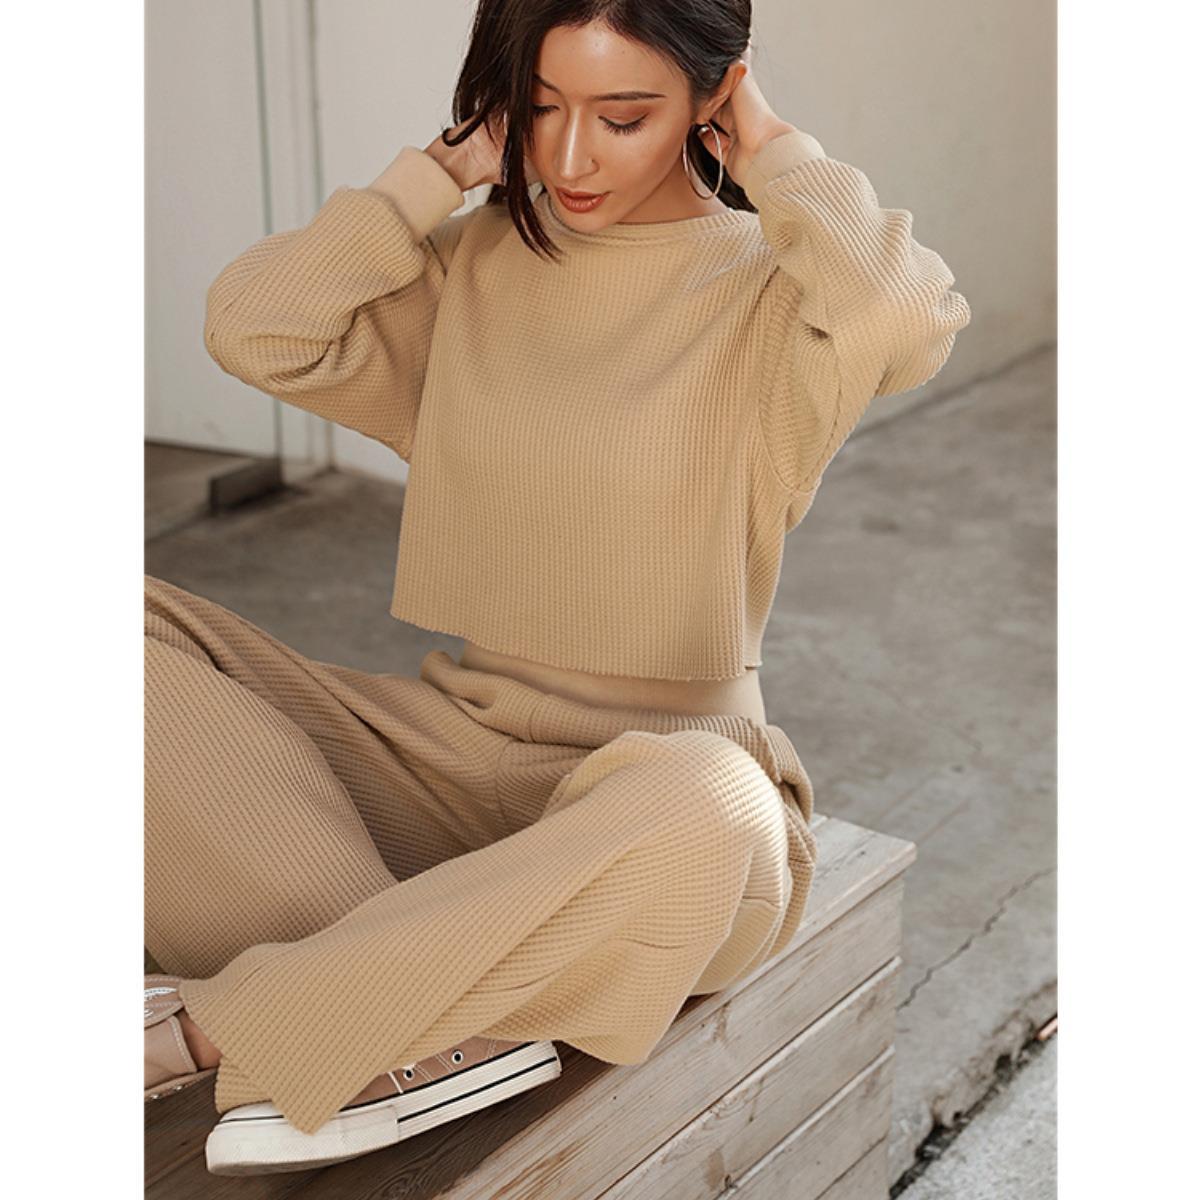 Casual Fall/Winter Two Pieces Tops & Wide Legs Pants-Suits-Free Shipping at meselling99